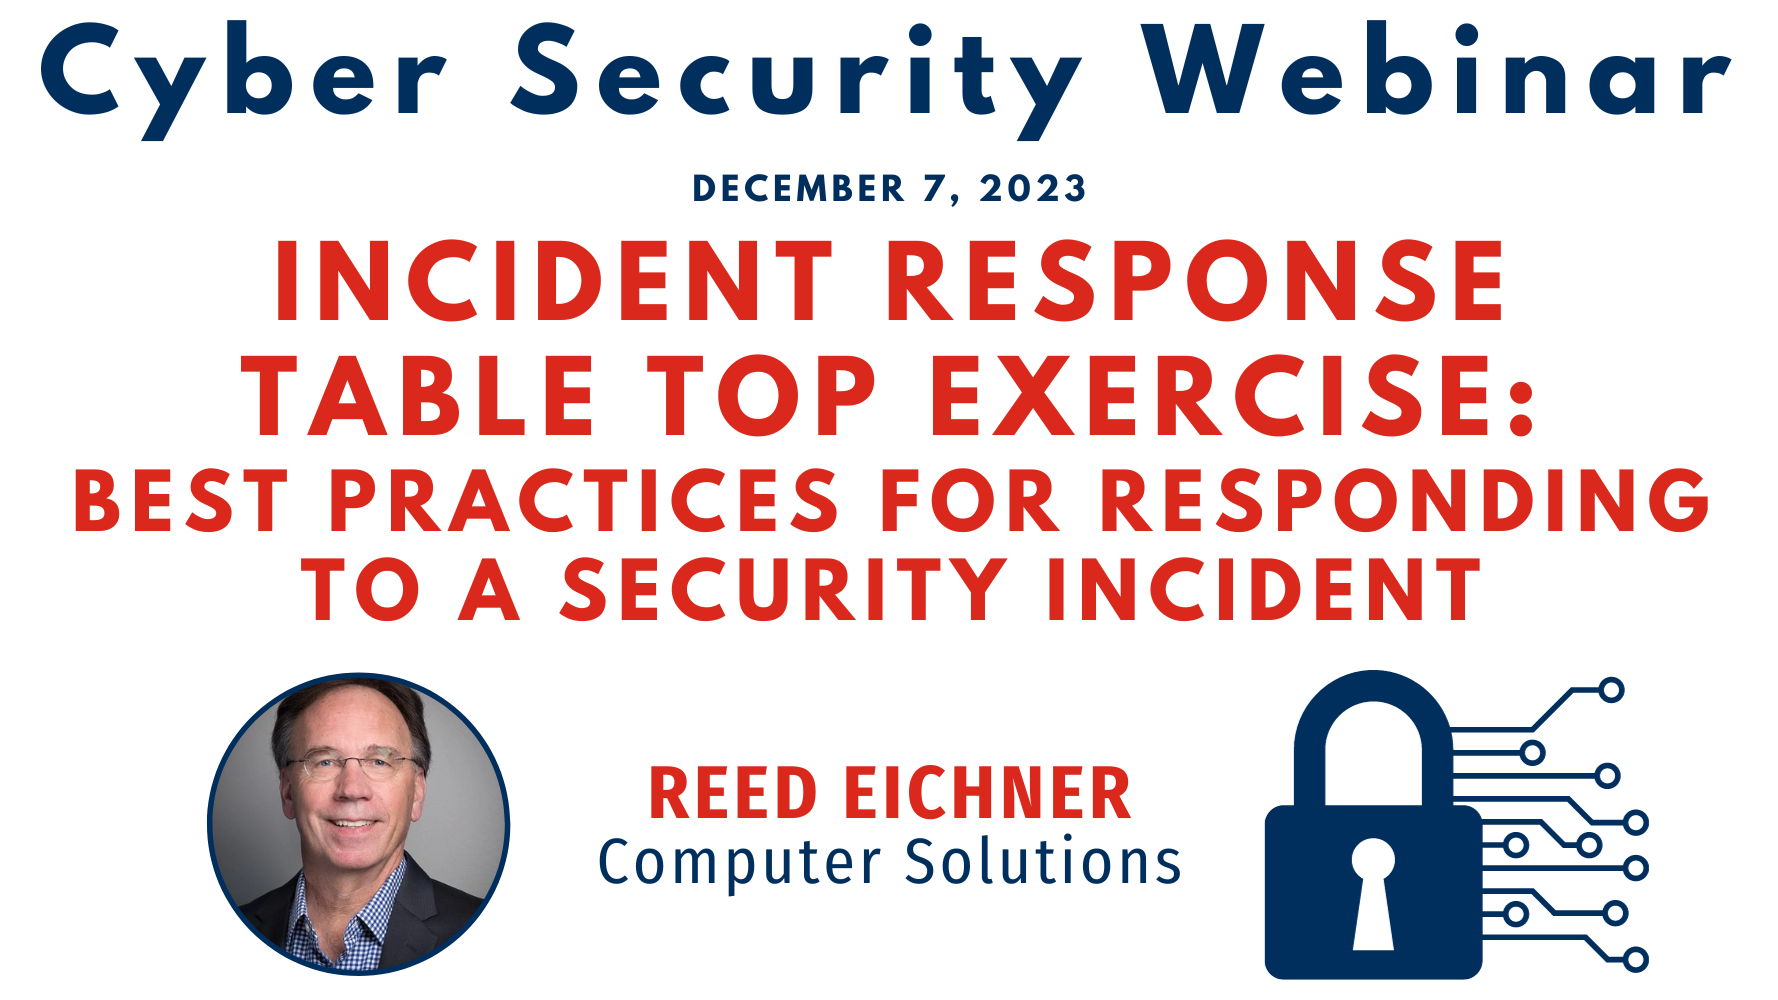 Cyber Security Tabletop Exercise - Reed Eichner